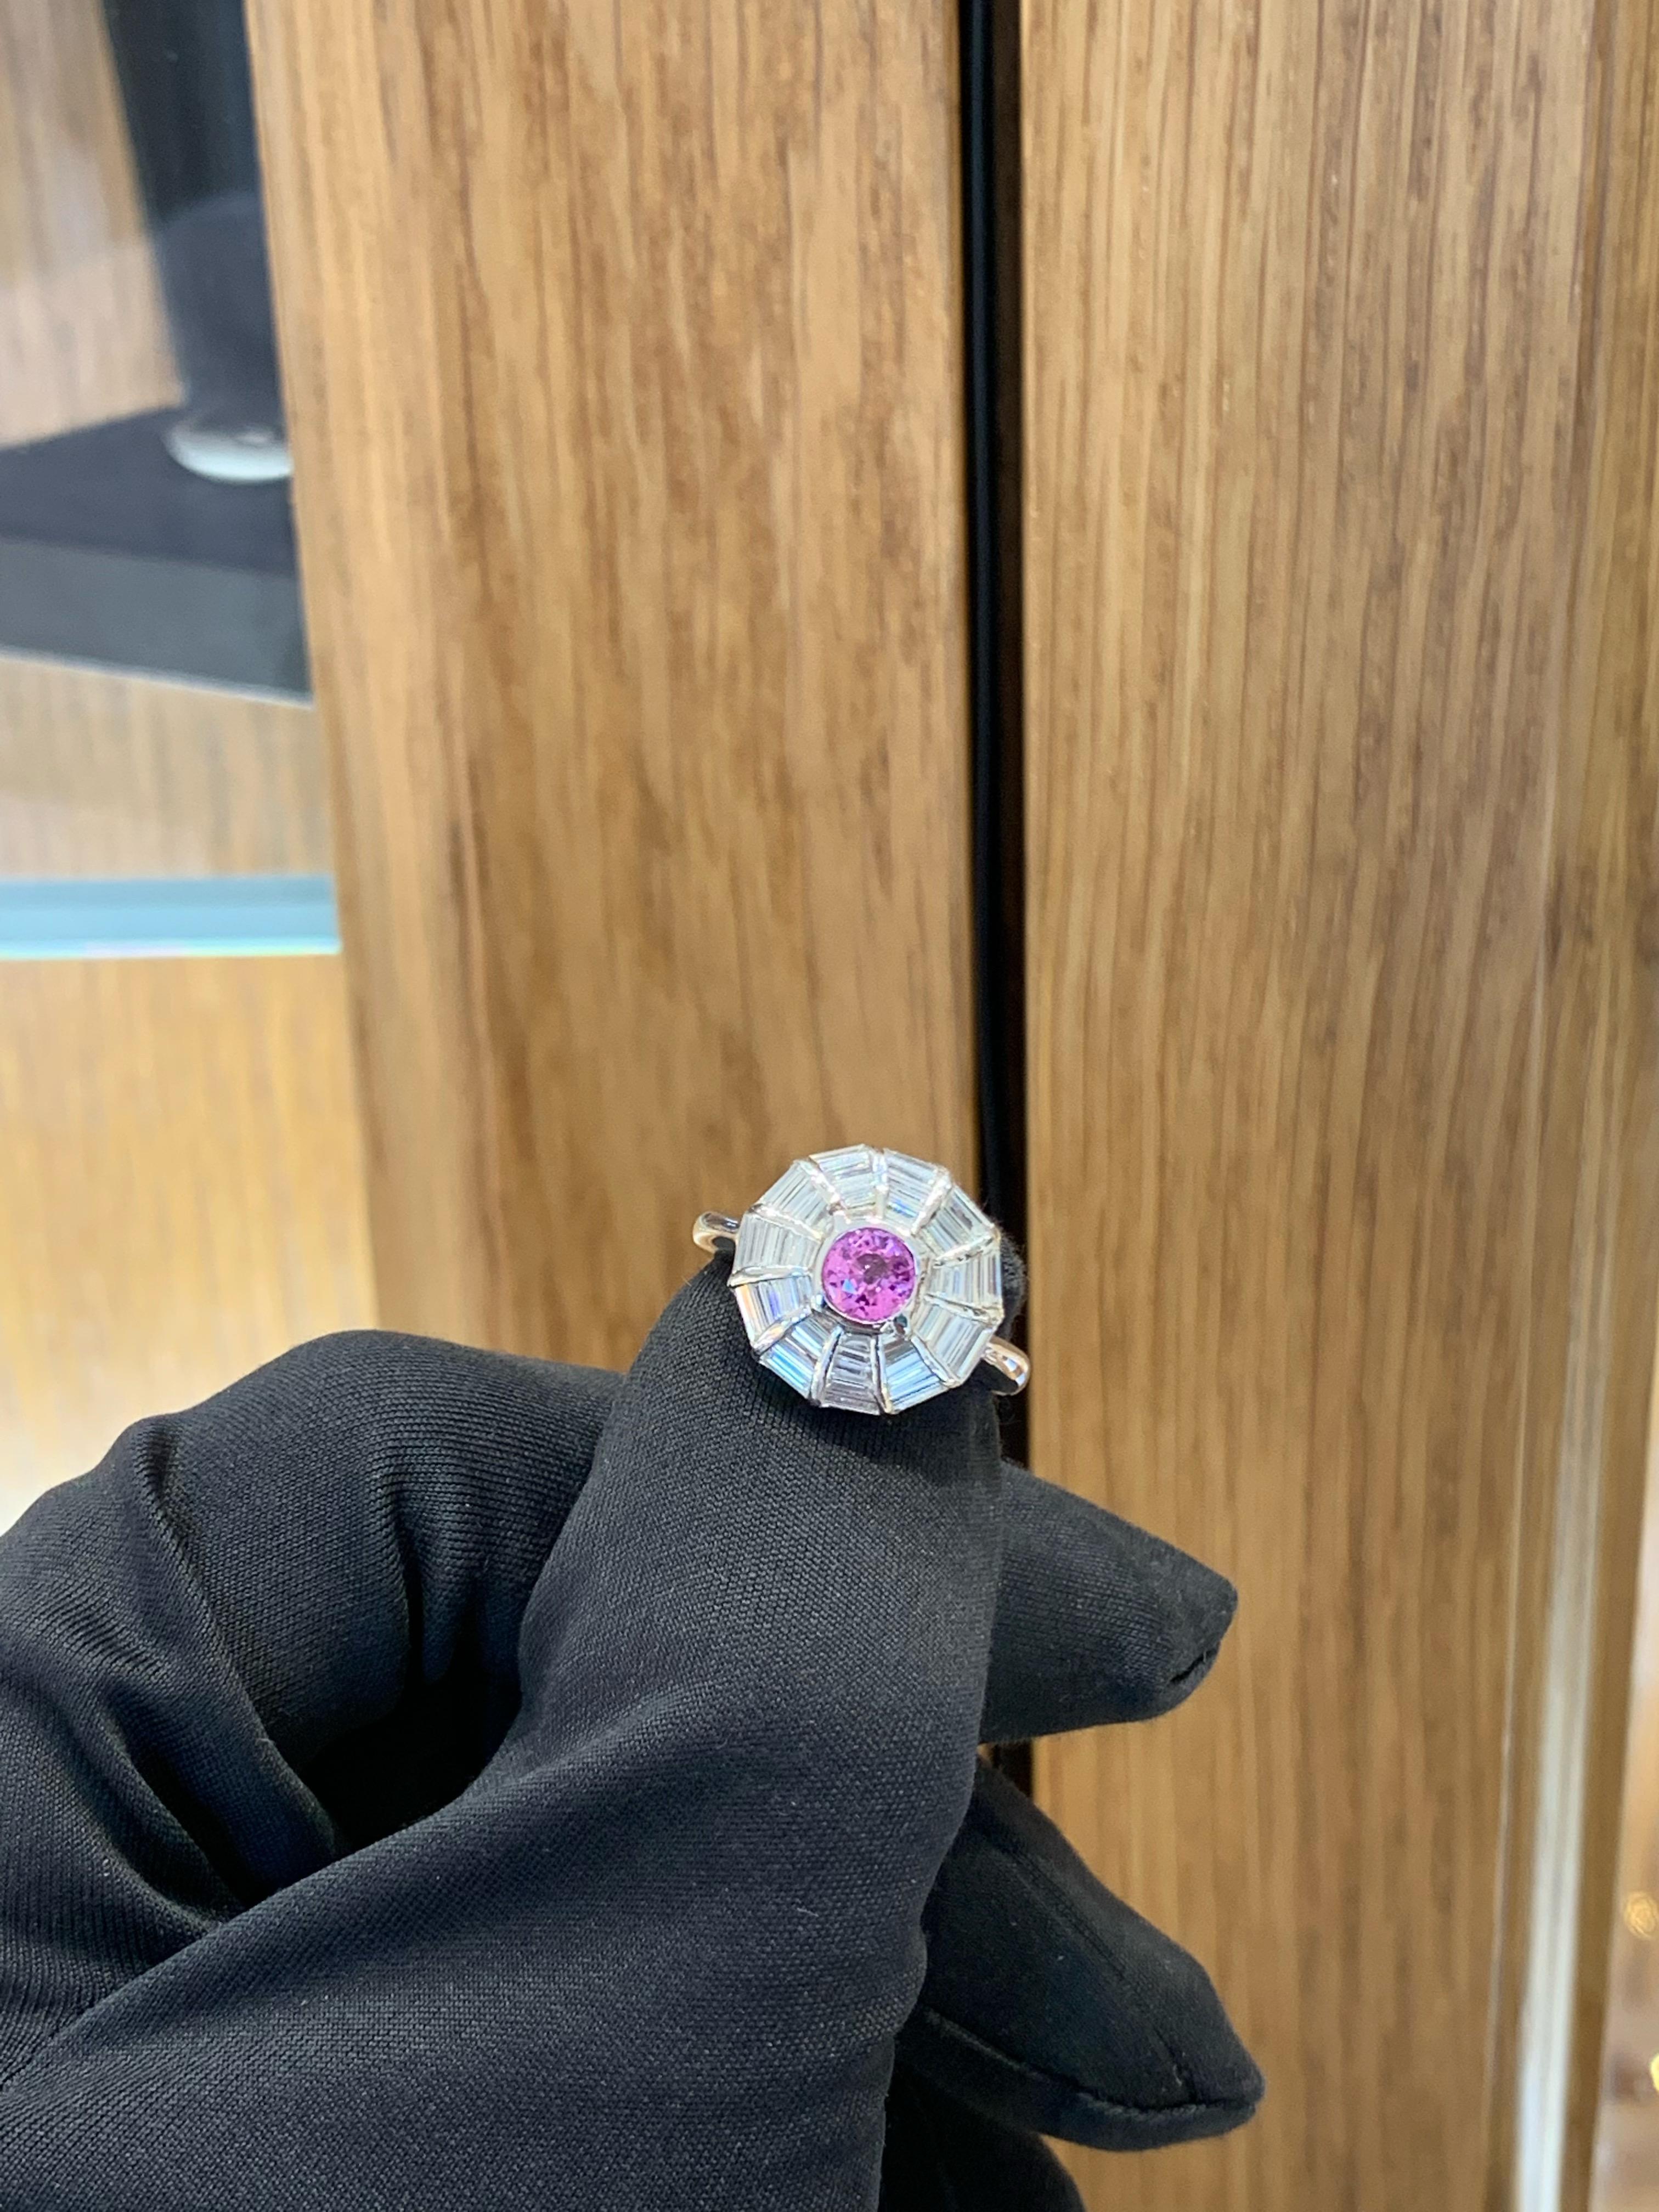 Beautiful Pink Sapphire & Diamond Ring Set In 18k White Gold.
Amazing Shine, Incredible Craftsmanship.
Great Statement Piece.
Very Well Crafted.
Approximately 0.75 Carats Pink Sapphire.
Approximately 2.0 Carats Baguette Cut Diamonds.
Nice & Clean